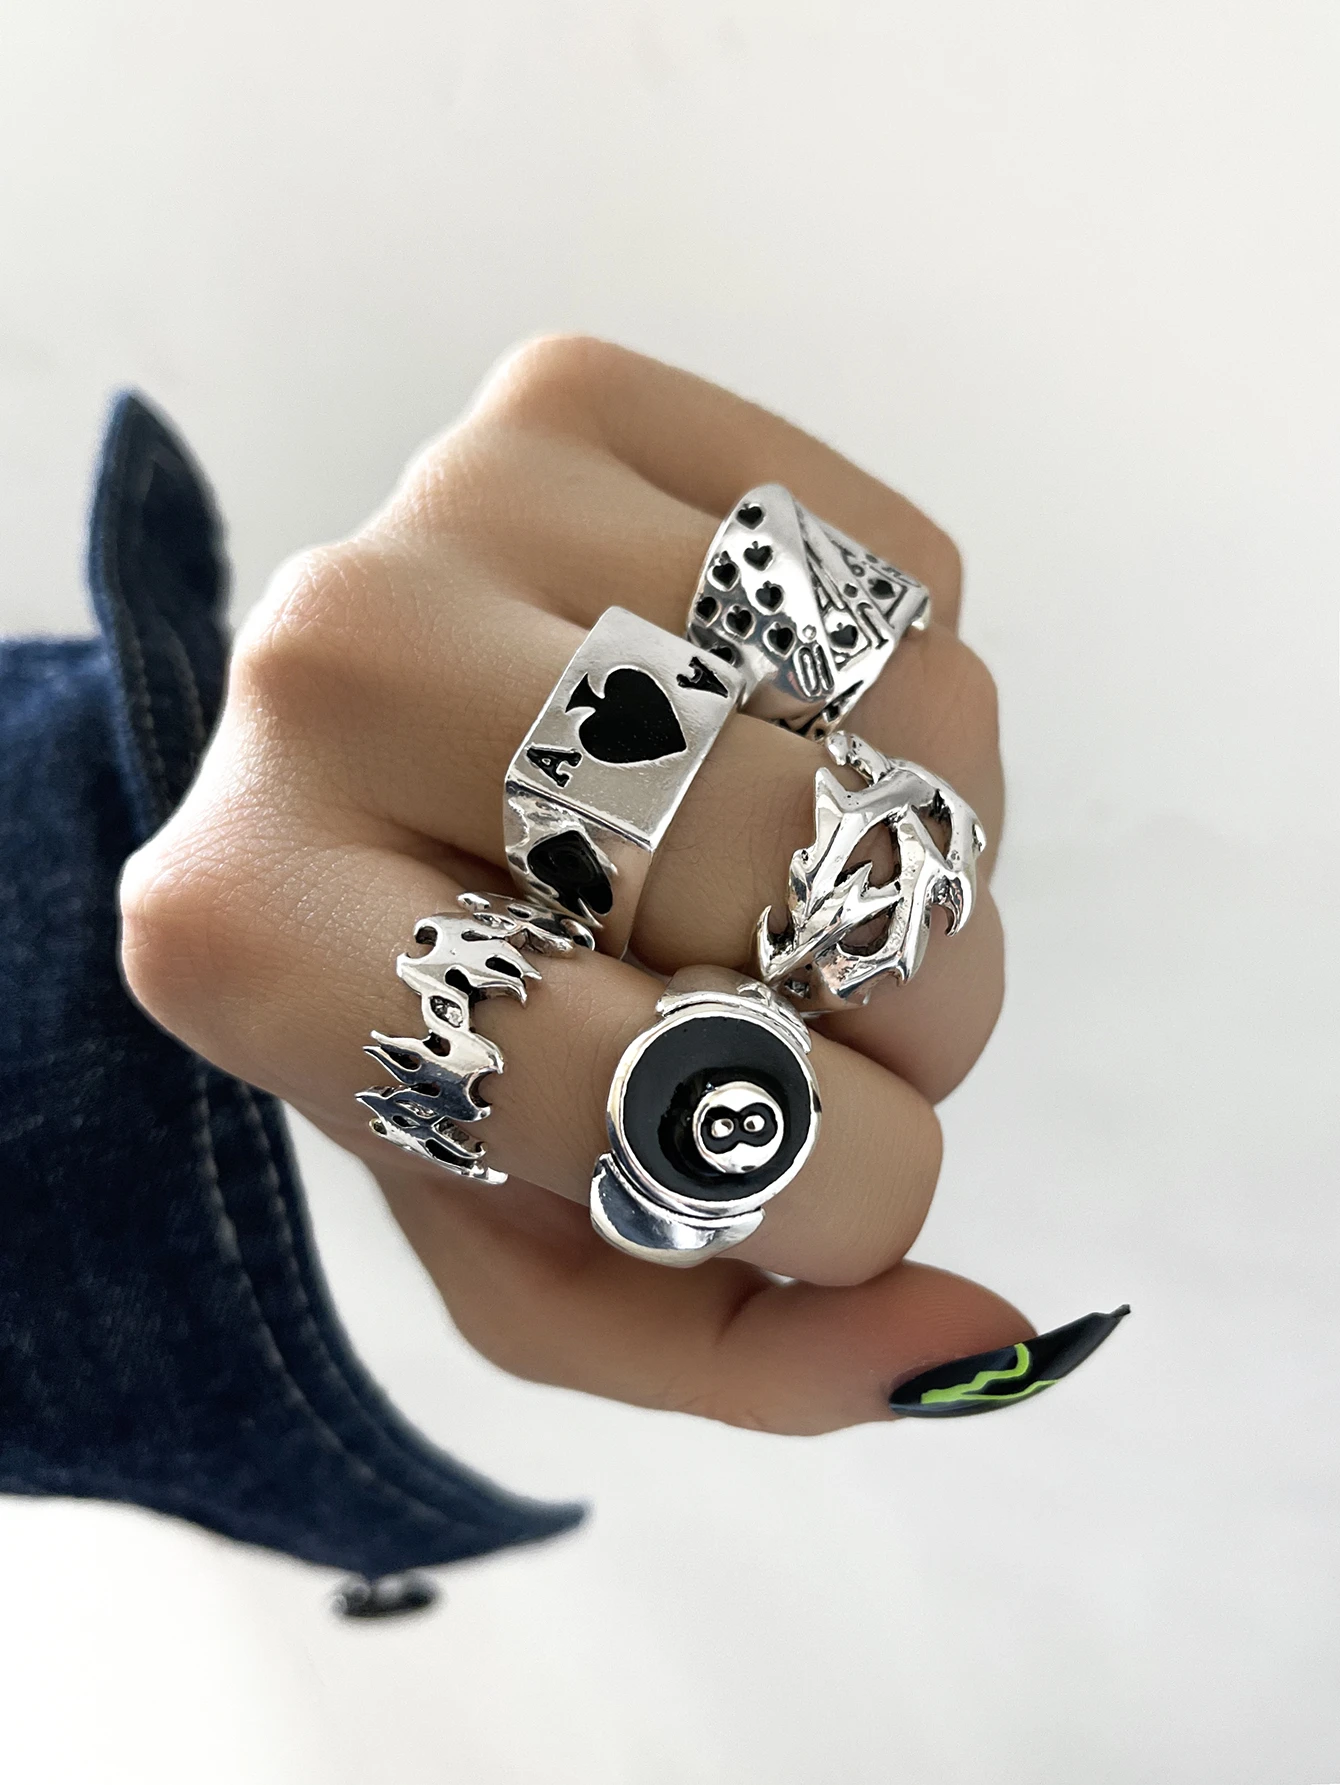 Stillgirl Punk Poker Billiards Rings for Women Funny Goth Kpop Flame Anillos Hip Hop Y2k Korean Fashion Male Couple Gift Jewelry